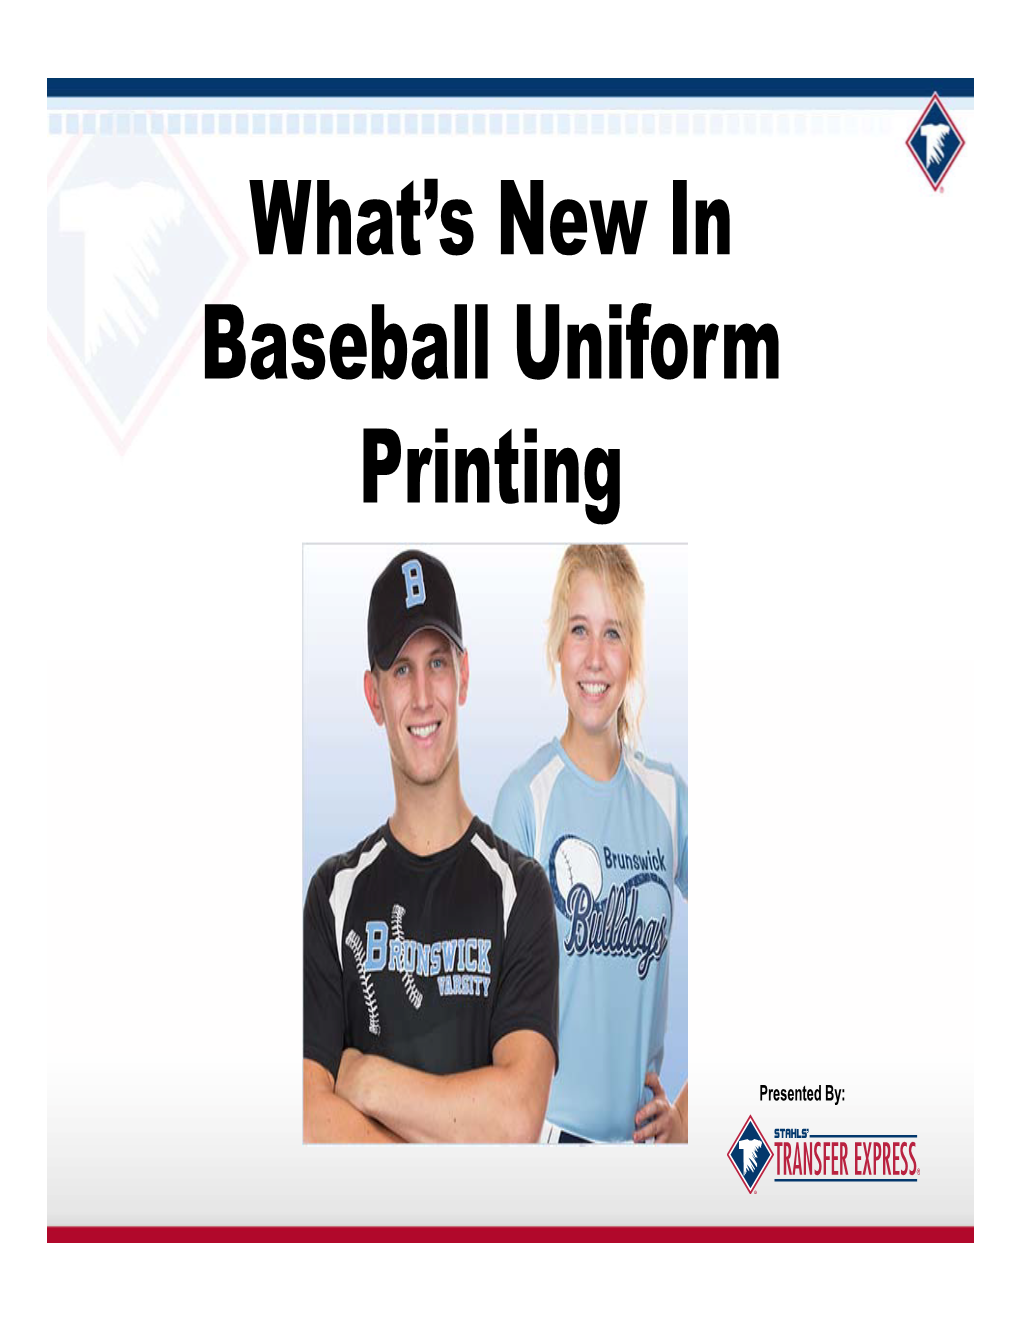 What's New in Baseball Uniform Printing